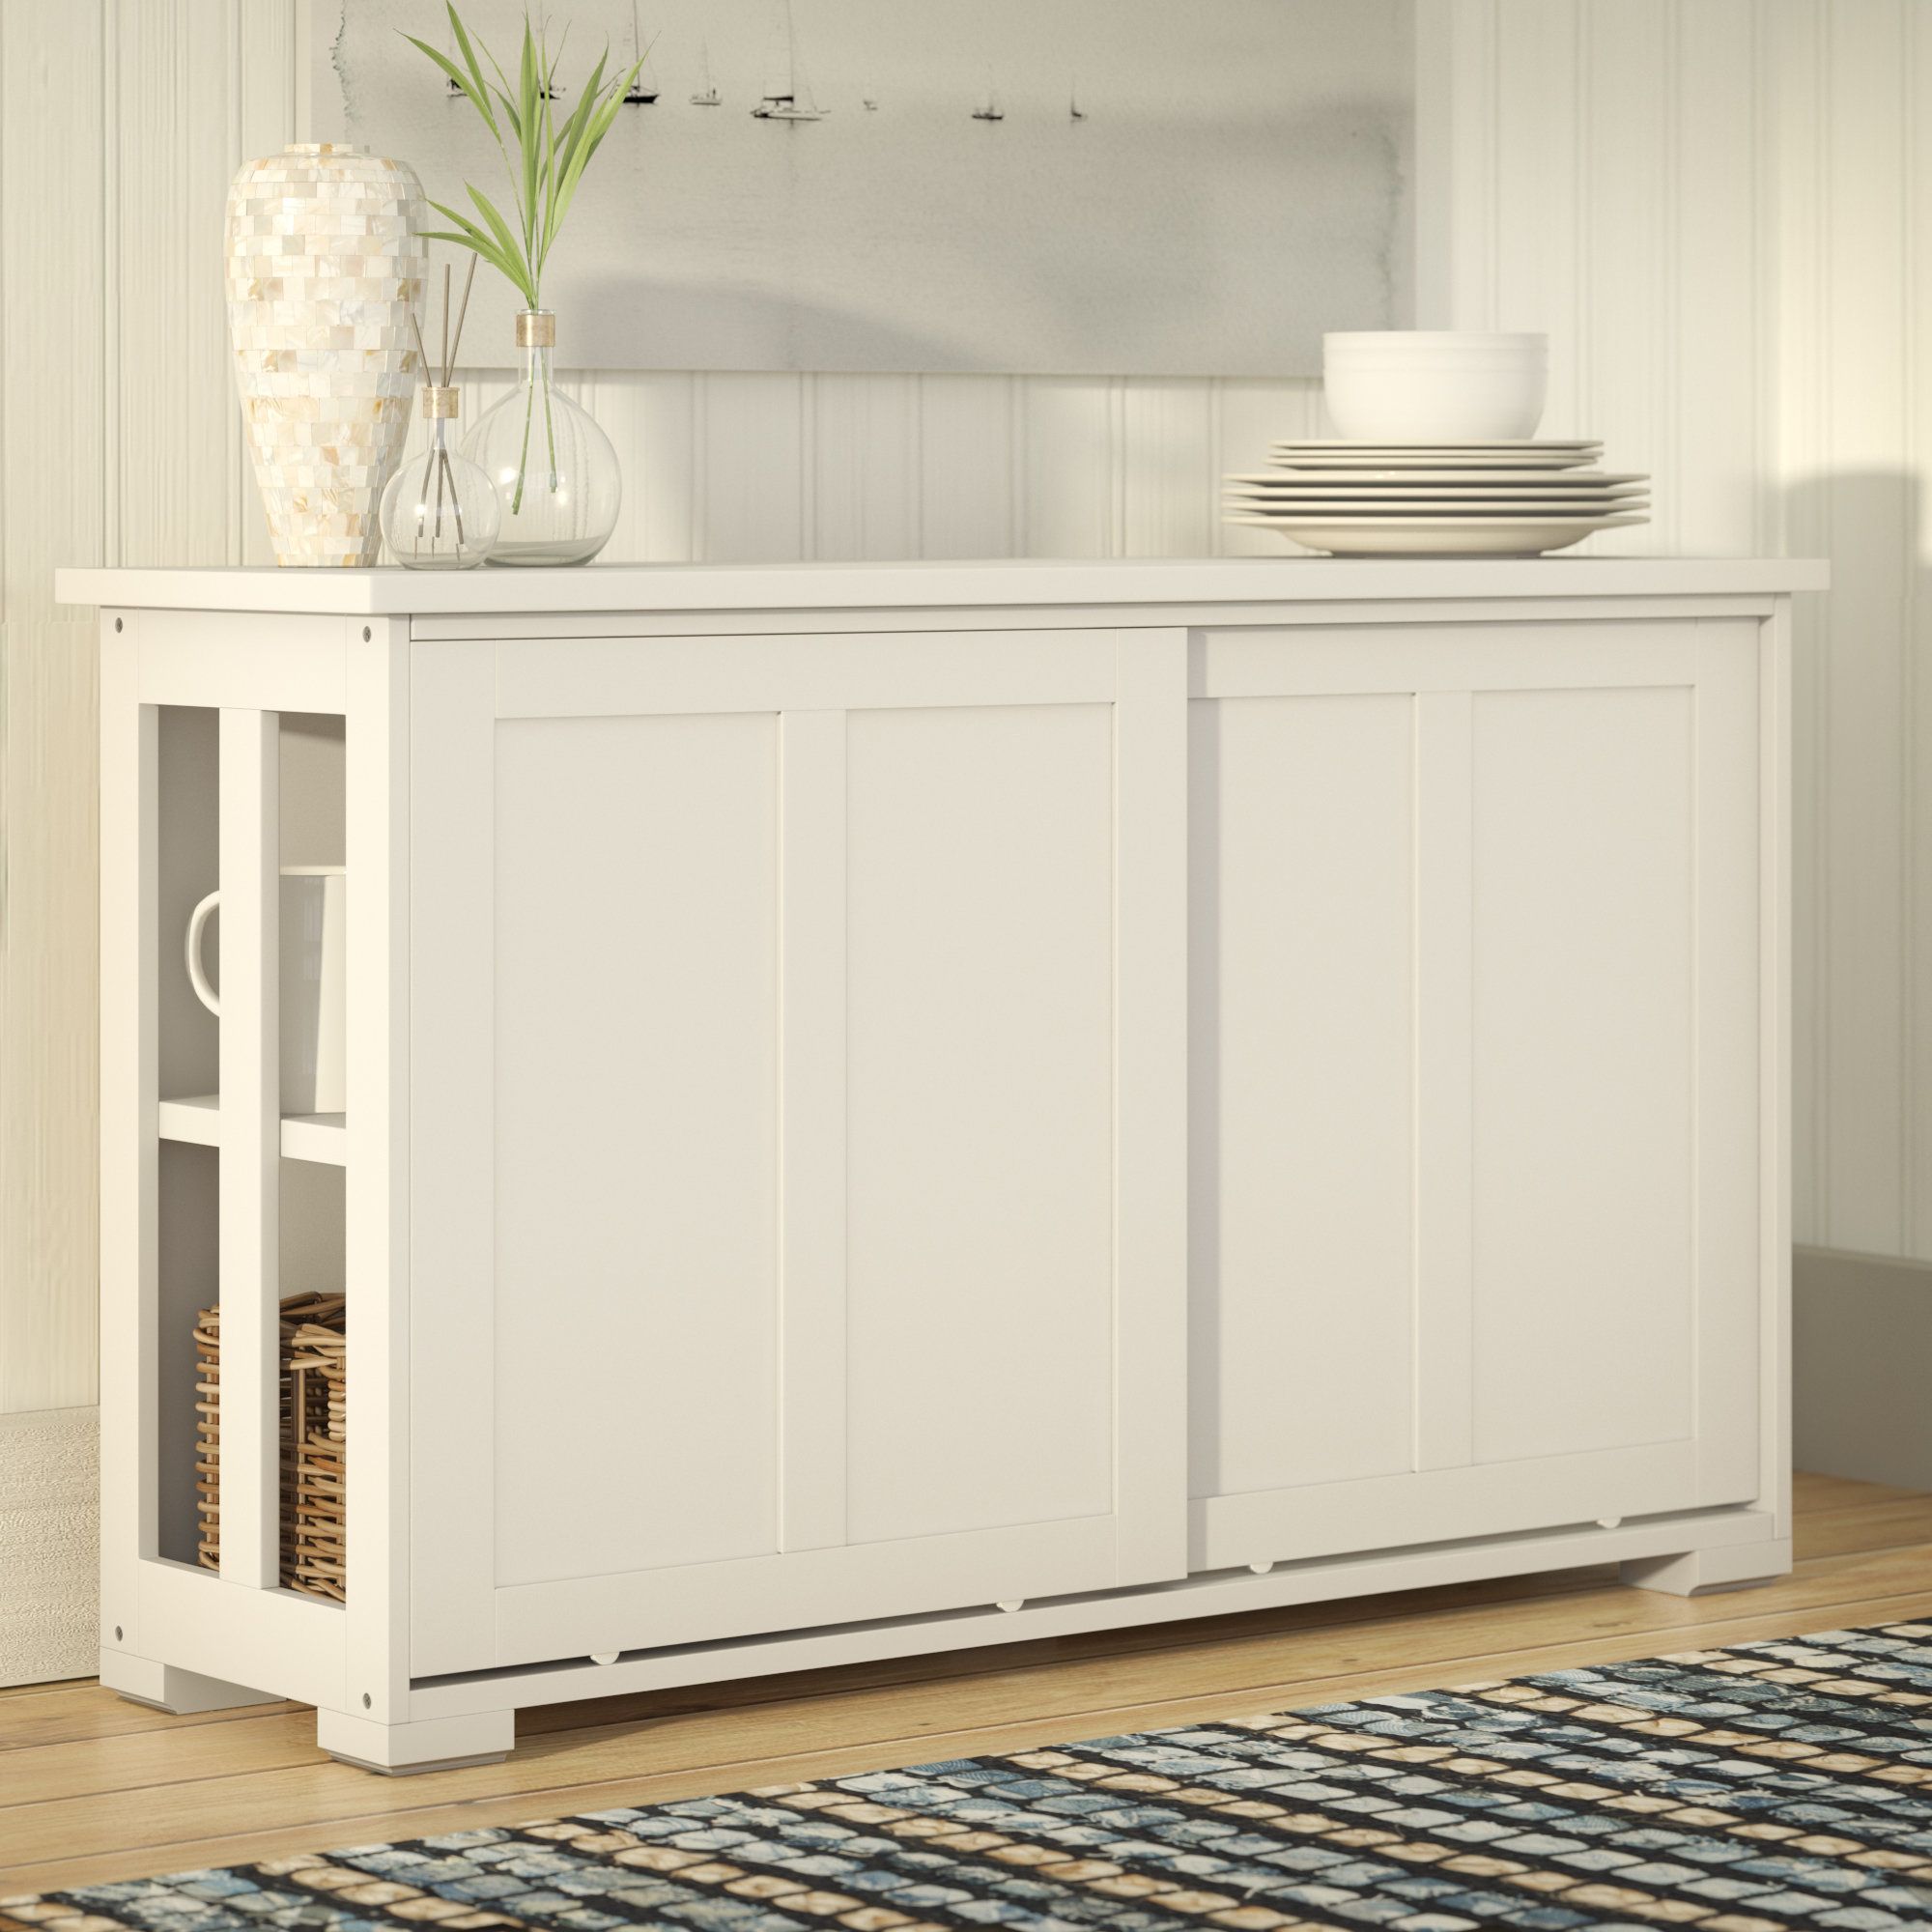 Long Narrow Sideboard | Wayfair Inside Most Up To Date Dormer Sideboards (View 18 of 20)